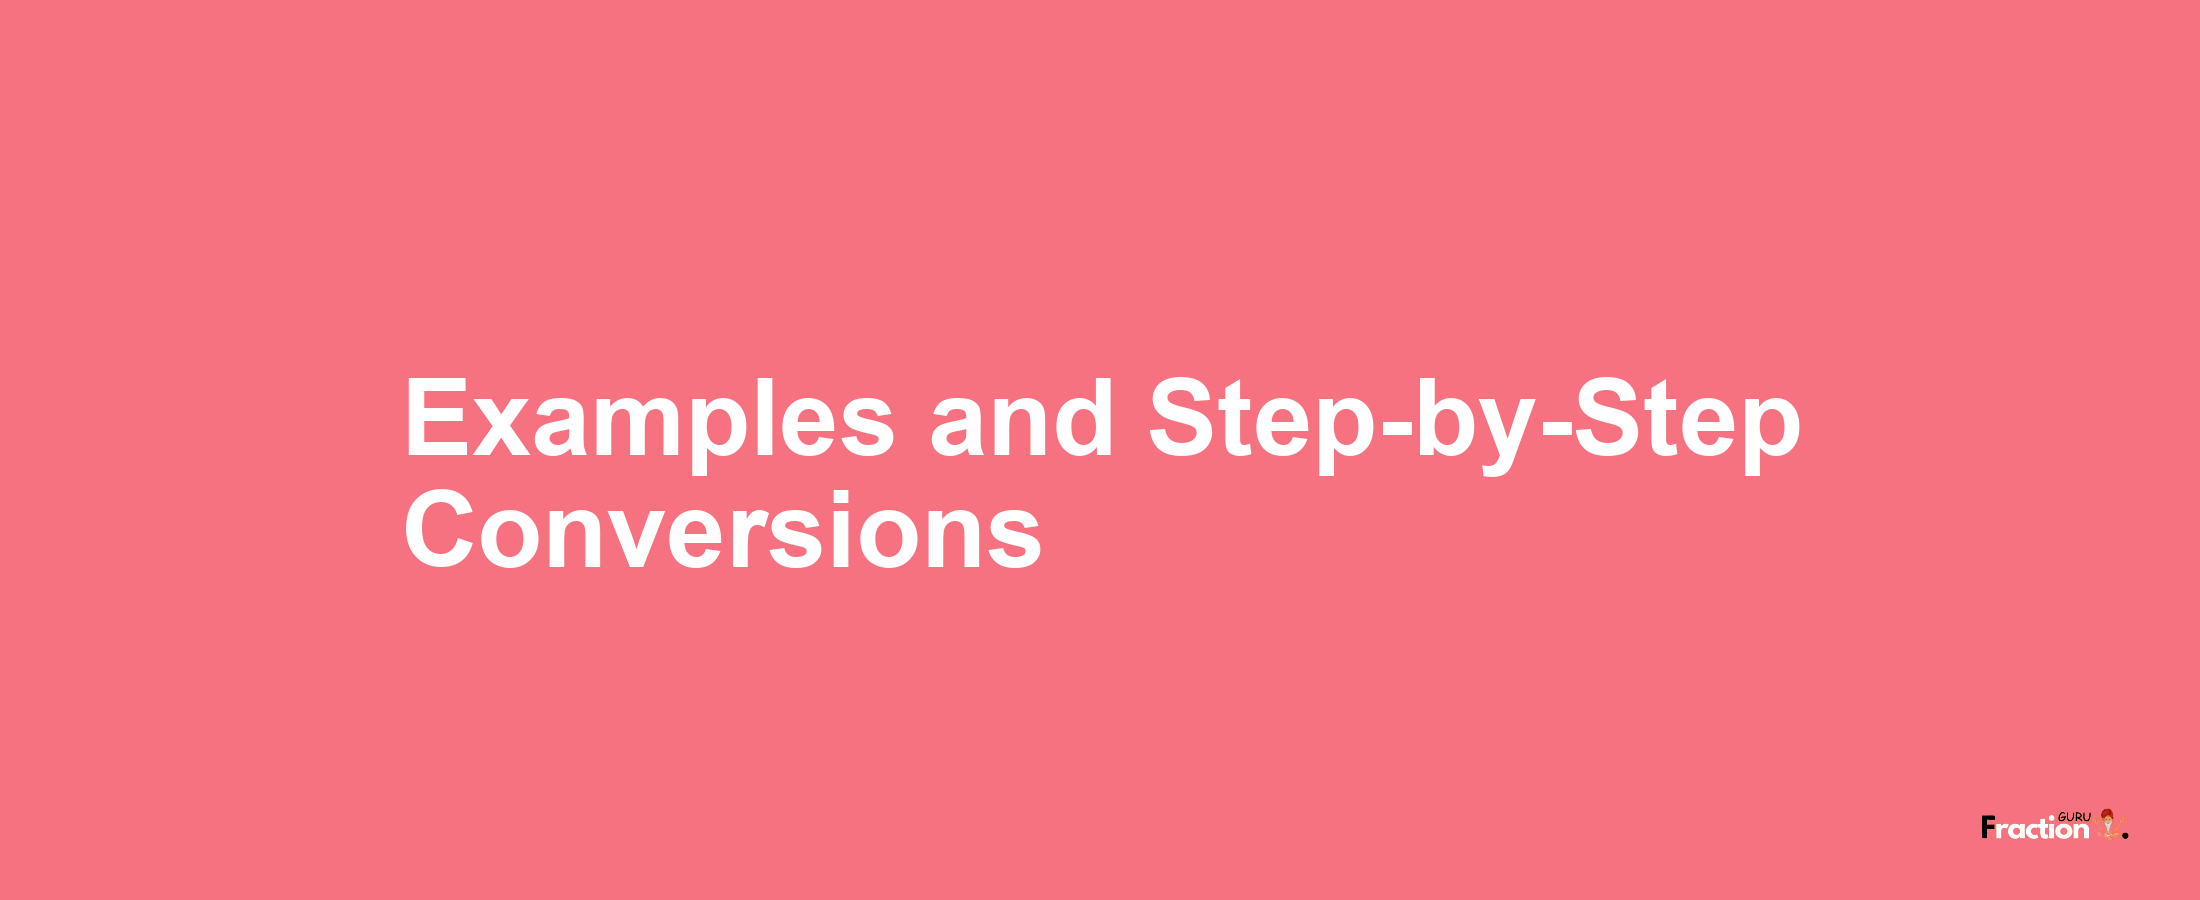 Examples and Step-by-Step Conversions